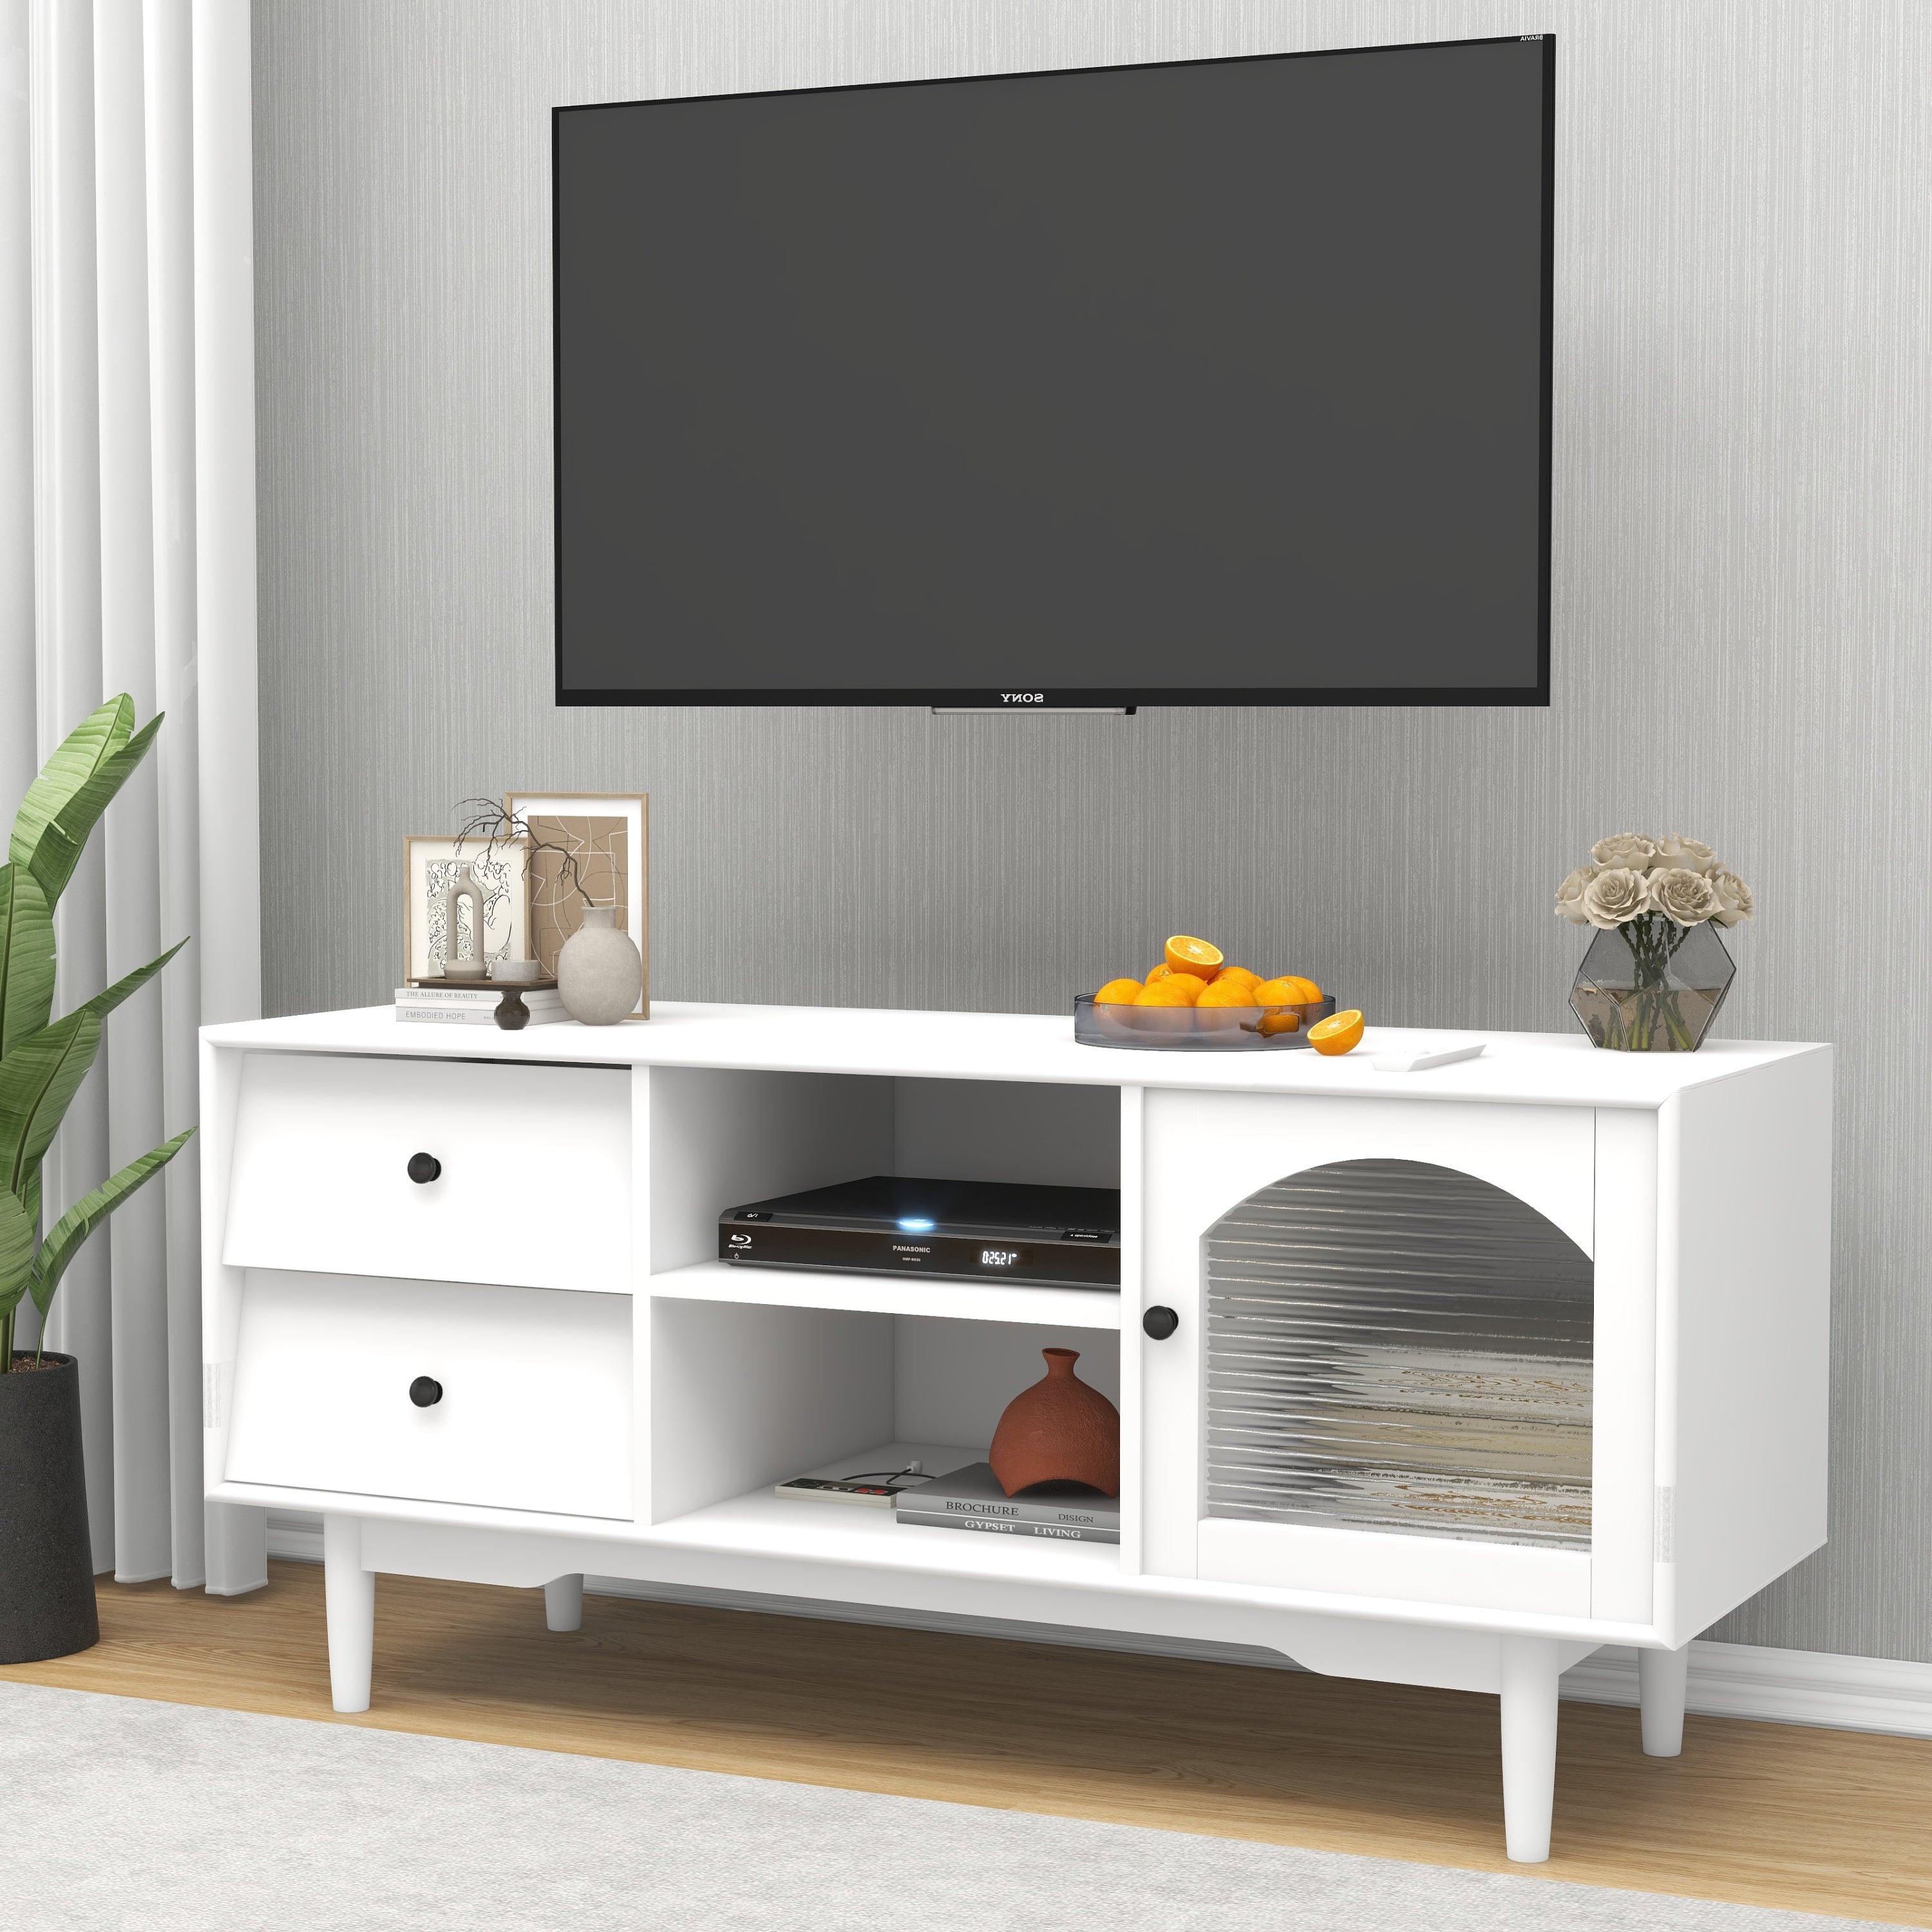 🆓🚛 Living Room White Tv Stand With Drawers & Open Shelves, a Cabinet With Glass Doors for Storage